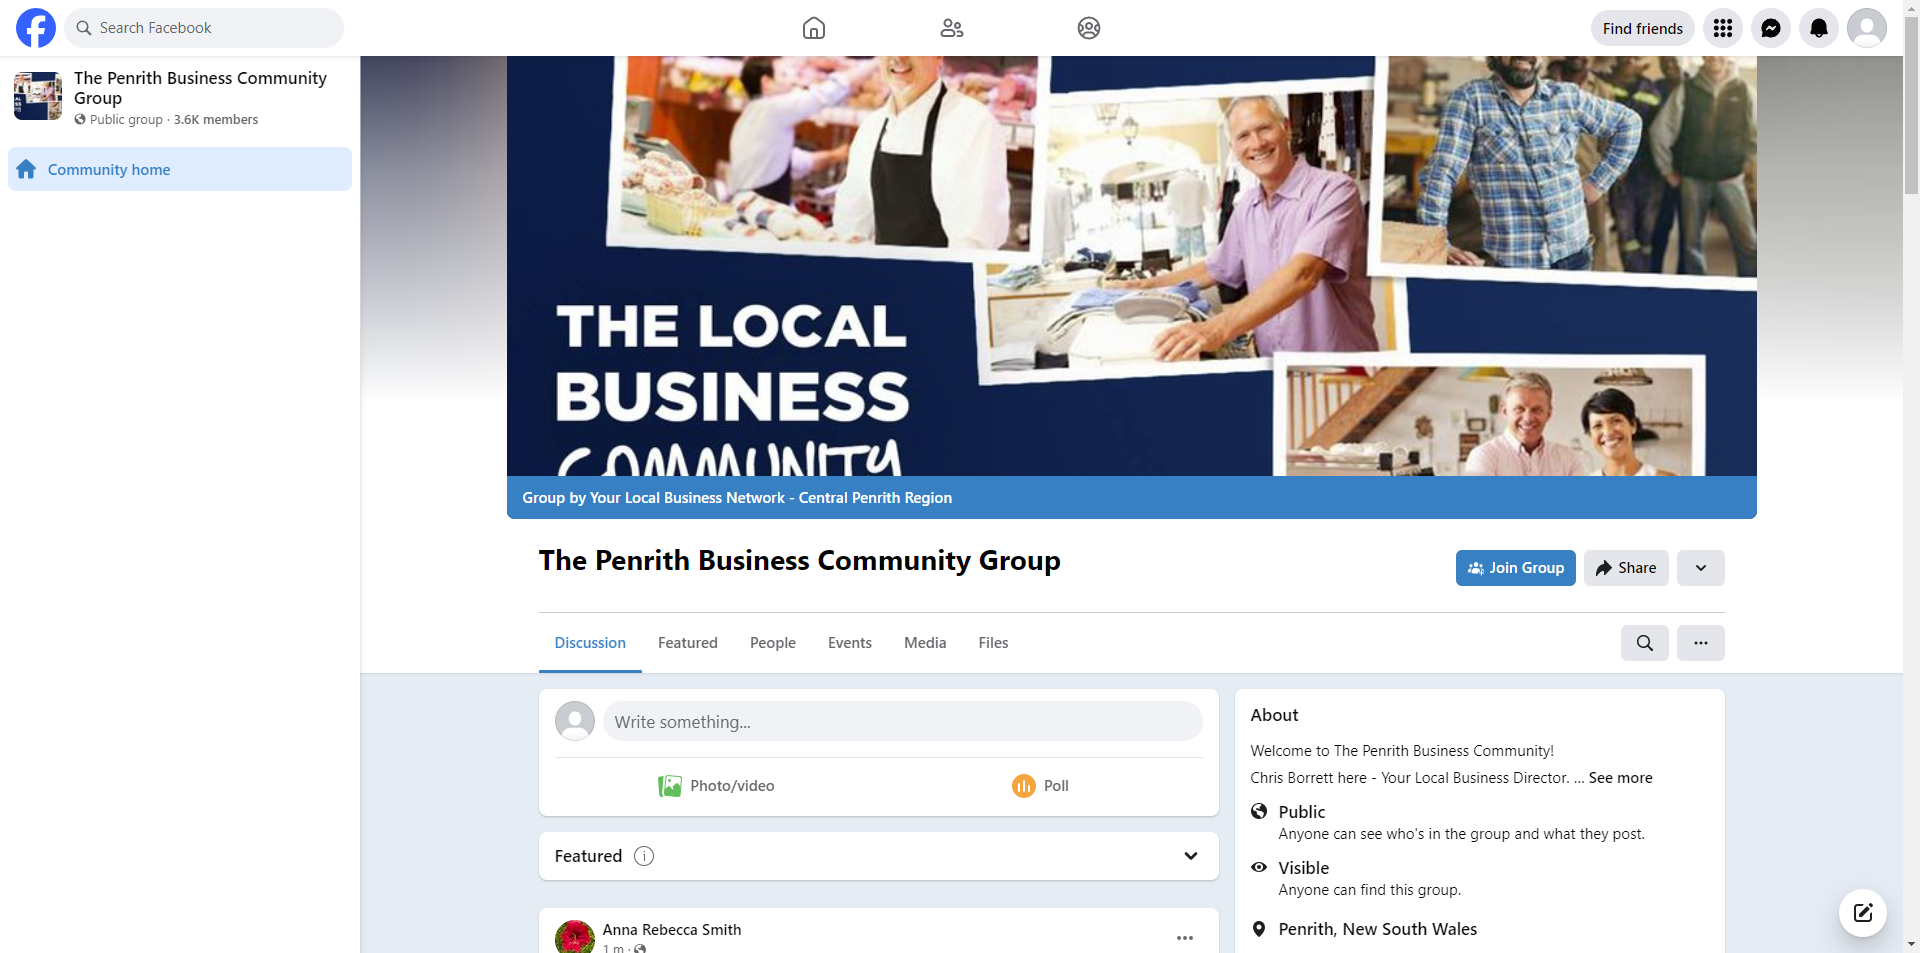 The Penrith Business Community Group